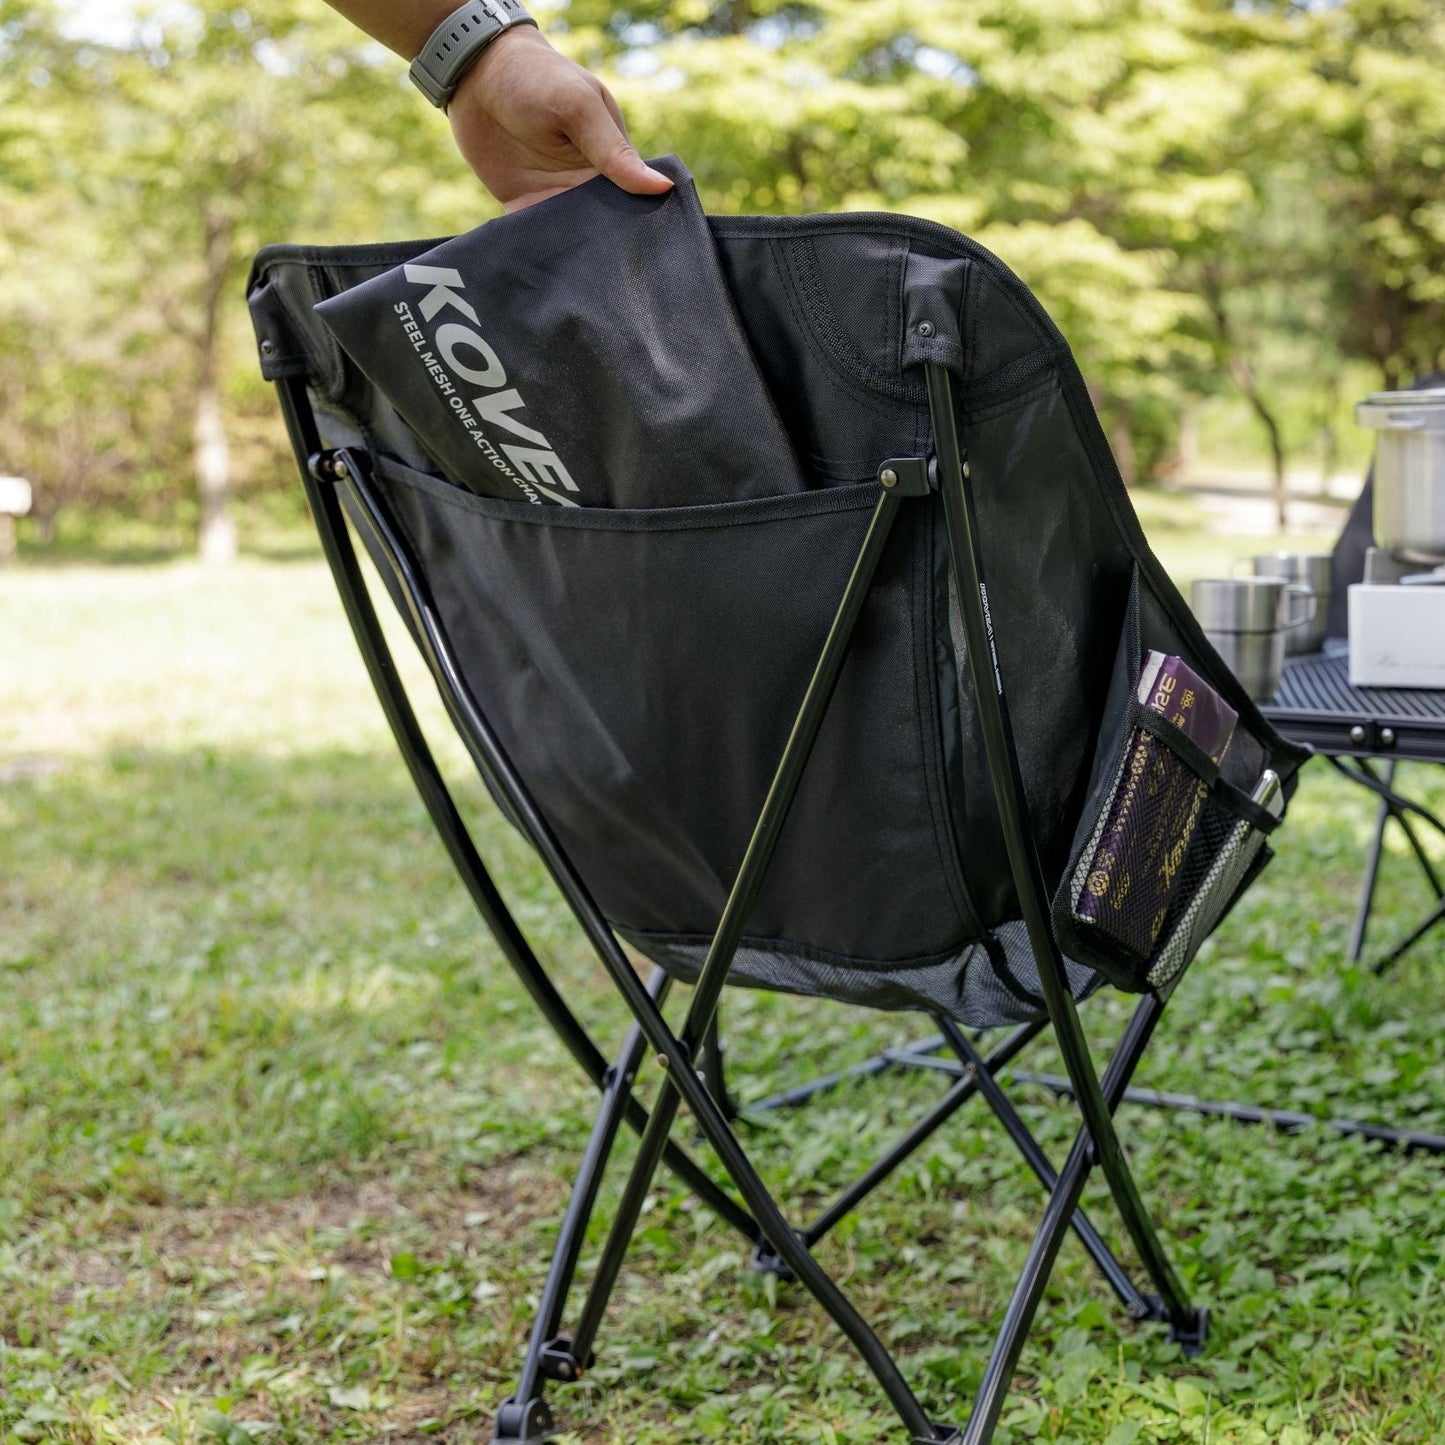 STEEL MESH ONE ACTION CHAIR (BLACK) - Kovea Camping Chair